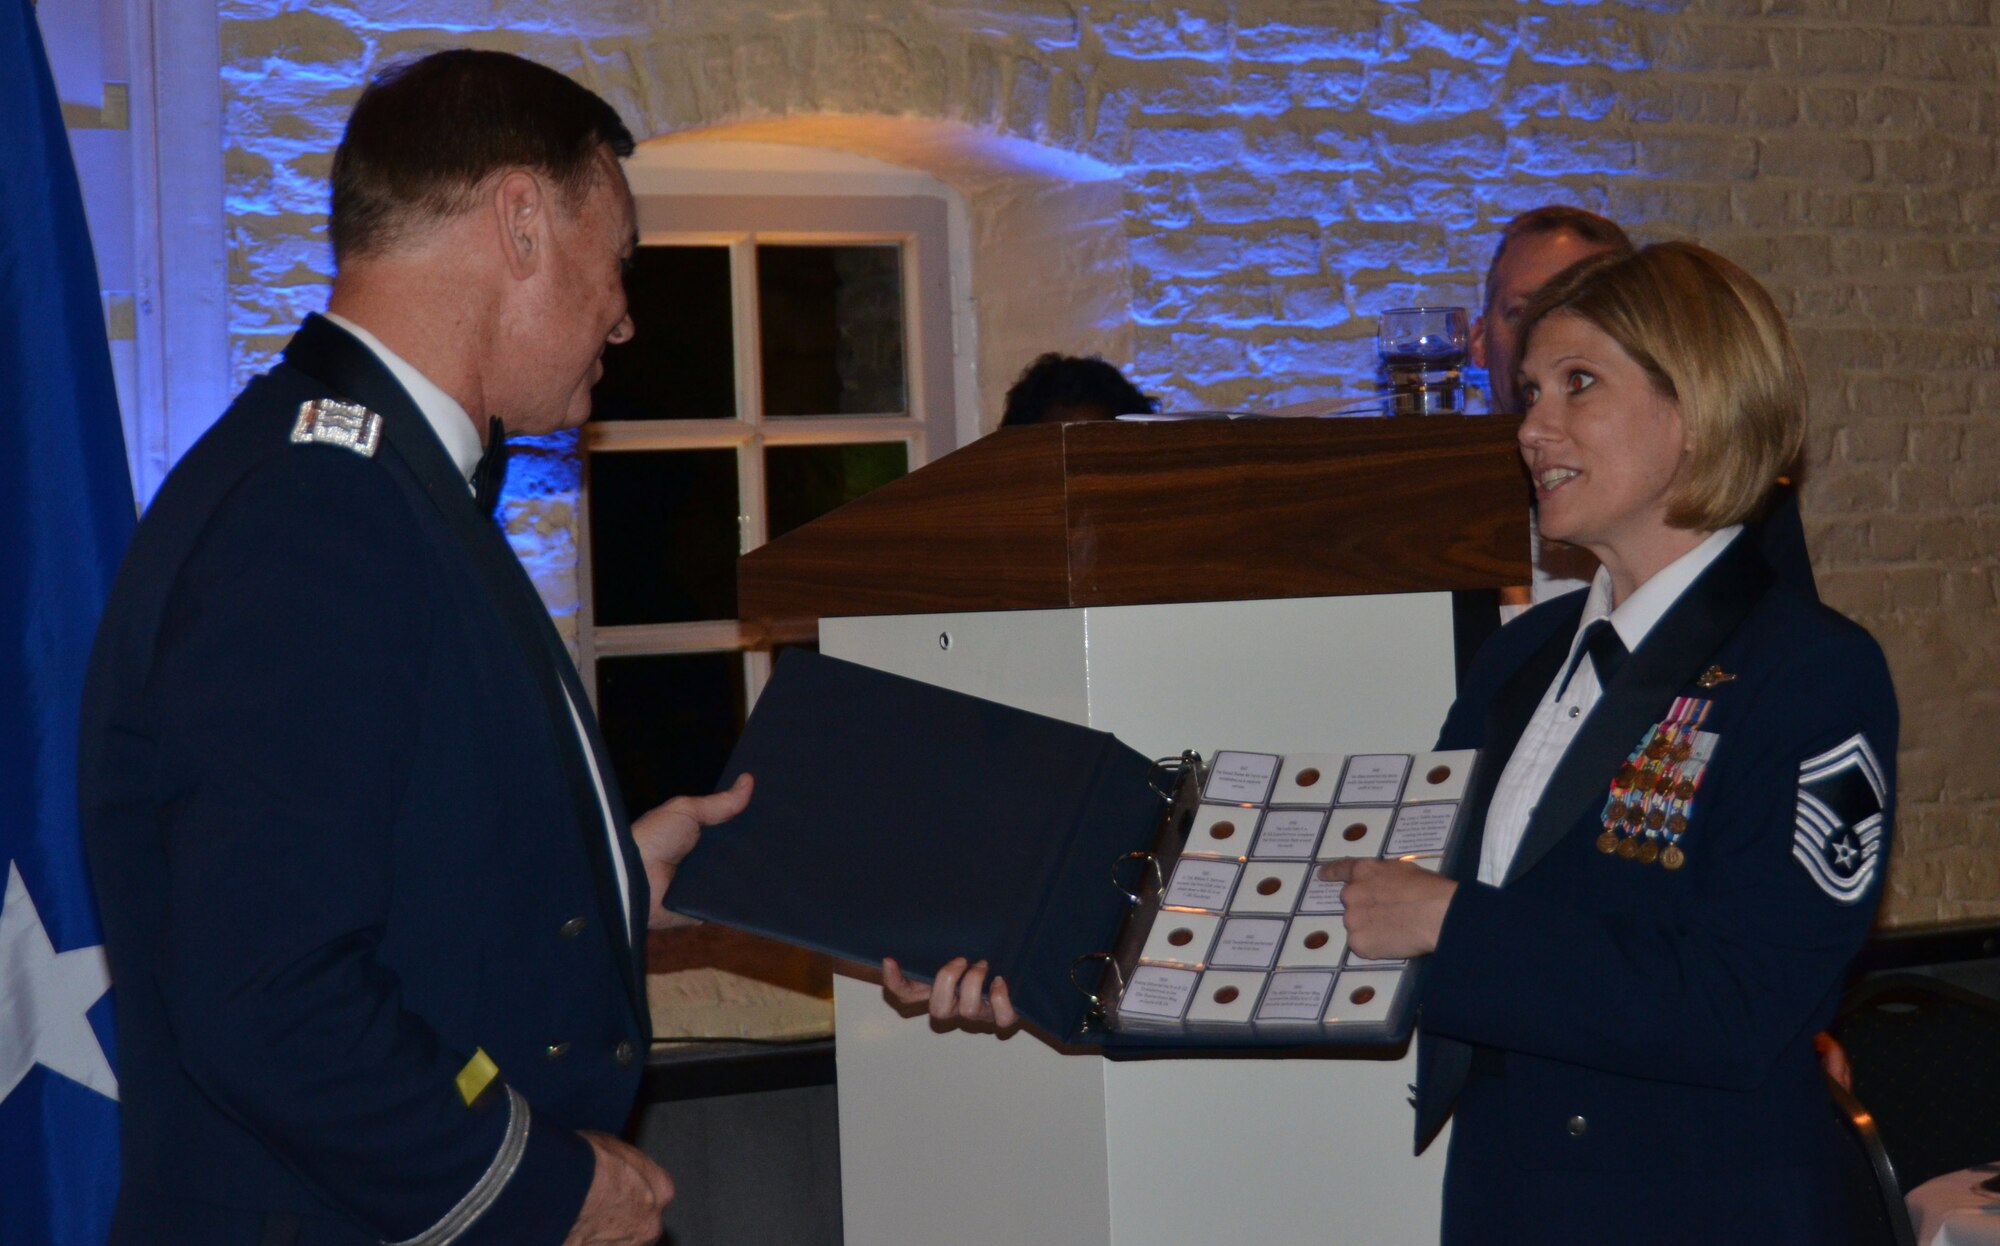 Air Force District of Washington Commander Maj. Gen. Darryl Burke is
presented with a token of gratitude by the senior enlisted leadership at
Geilenkirchen, Germany during the Tri-Border U.S. Air Force Ball Oct. 9,
2015. Burke, Commander of NATO's E3-A Component Flying Squadron One from
2001-2003, spoke about the rich history of the U.S. Air Force and how Airmen
of today are rising to the occasion to confront future challenges. AFDW
provides full-spectrum operational support including personnel, legal,
financial, contracting, and aircrew management to approximately 26,000
Airmen across the globe. (Courtesy Photo)
